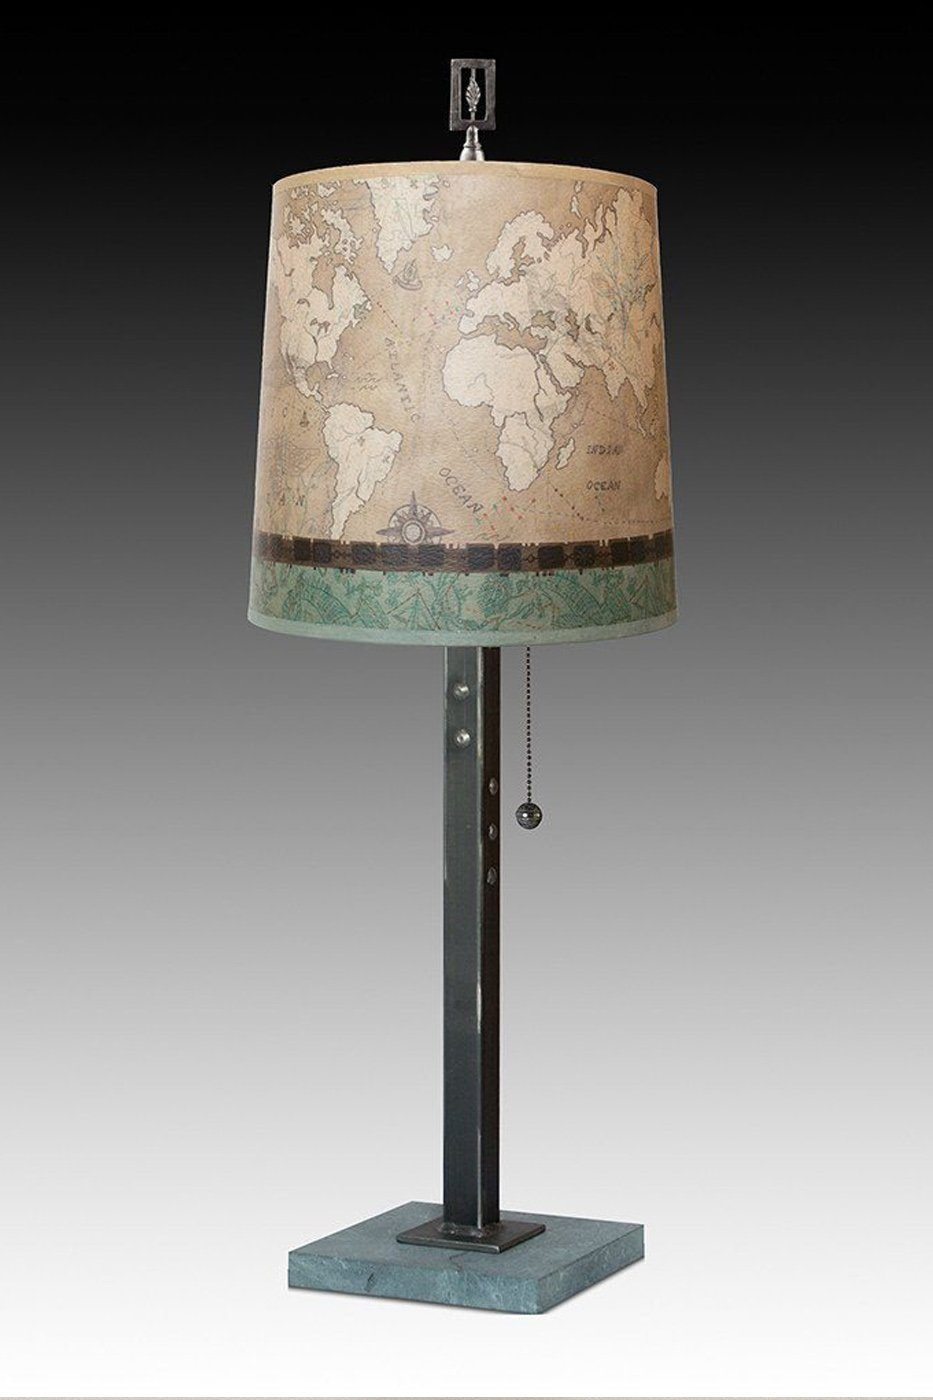 Janna Ugone & Co Table Lamps Steel Table Lamp with Medium Drum Shade in Voyages